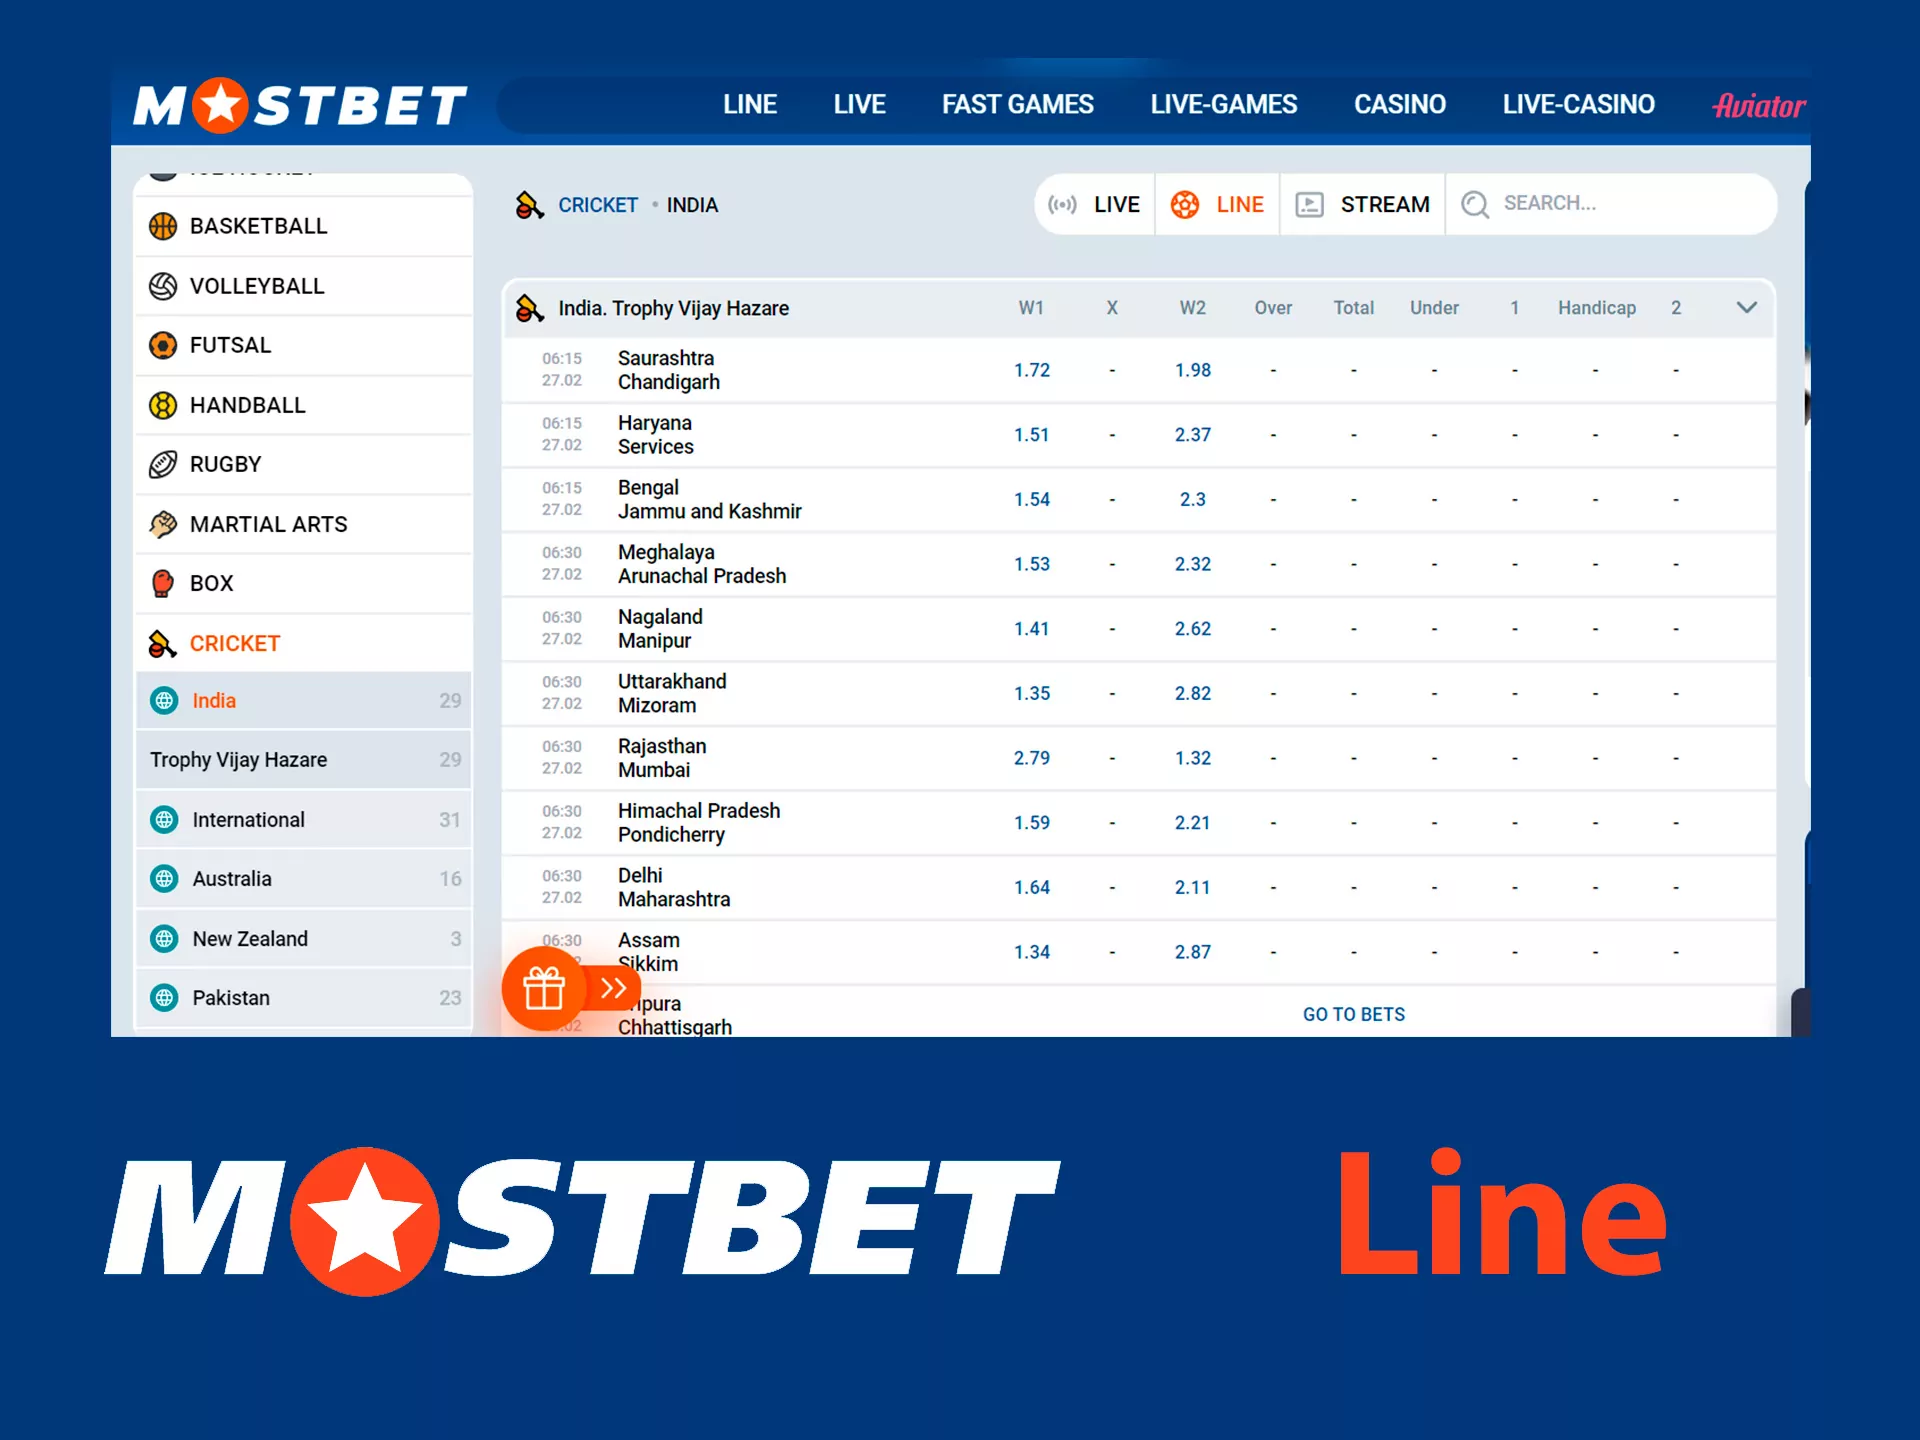 Line betting at Mostbet.